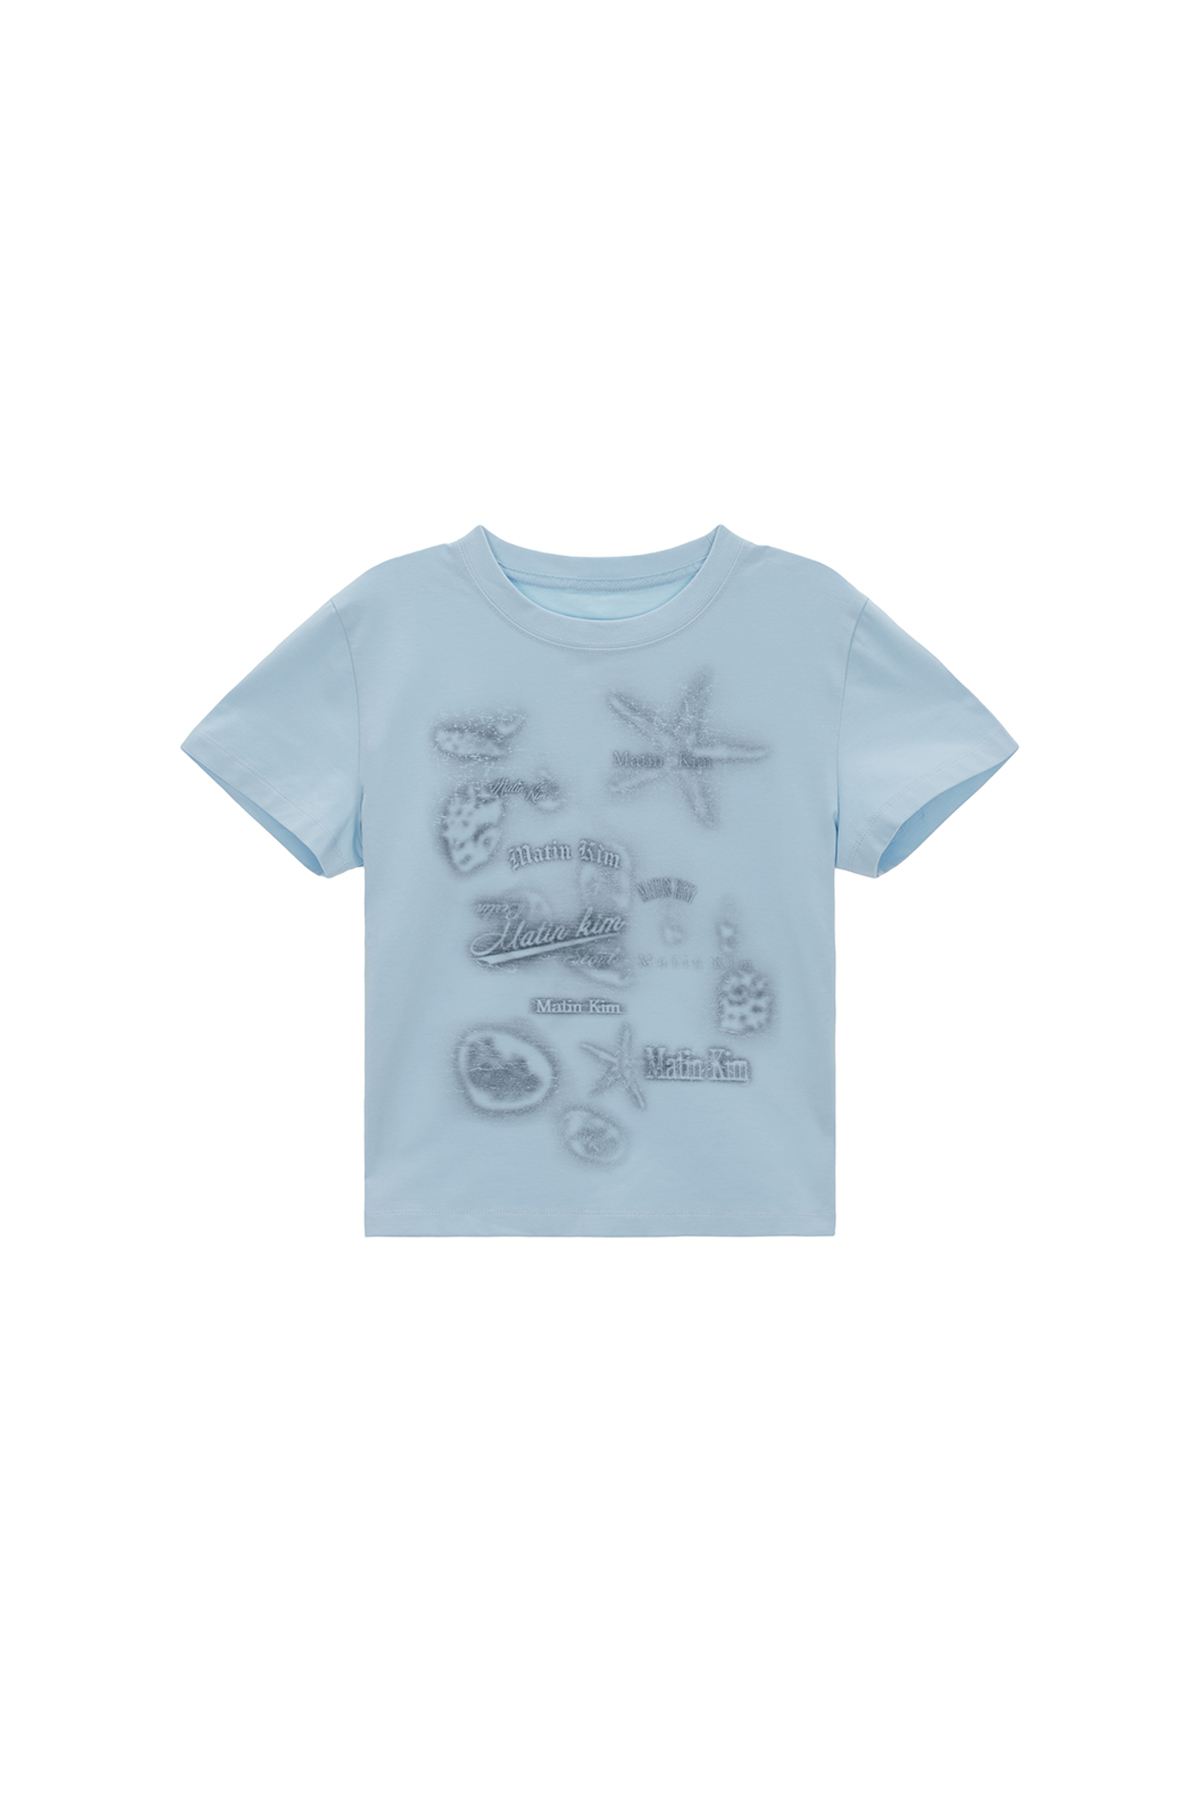 UNDER THE SEA GRAPHIC TOP IN SKY